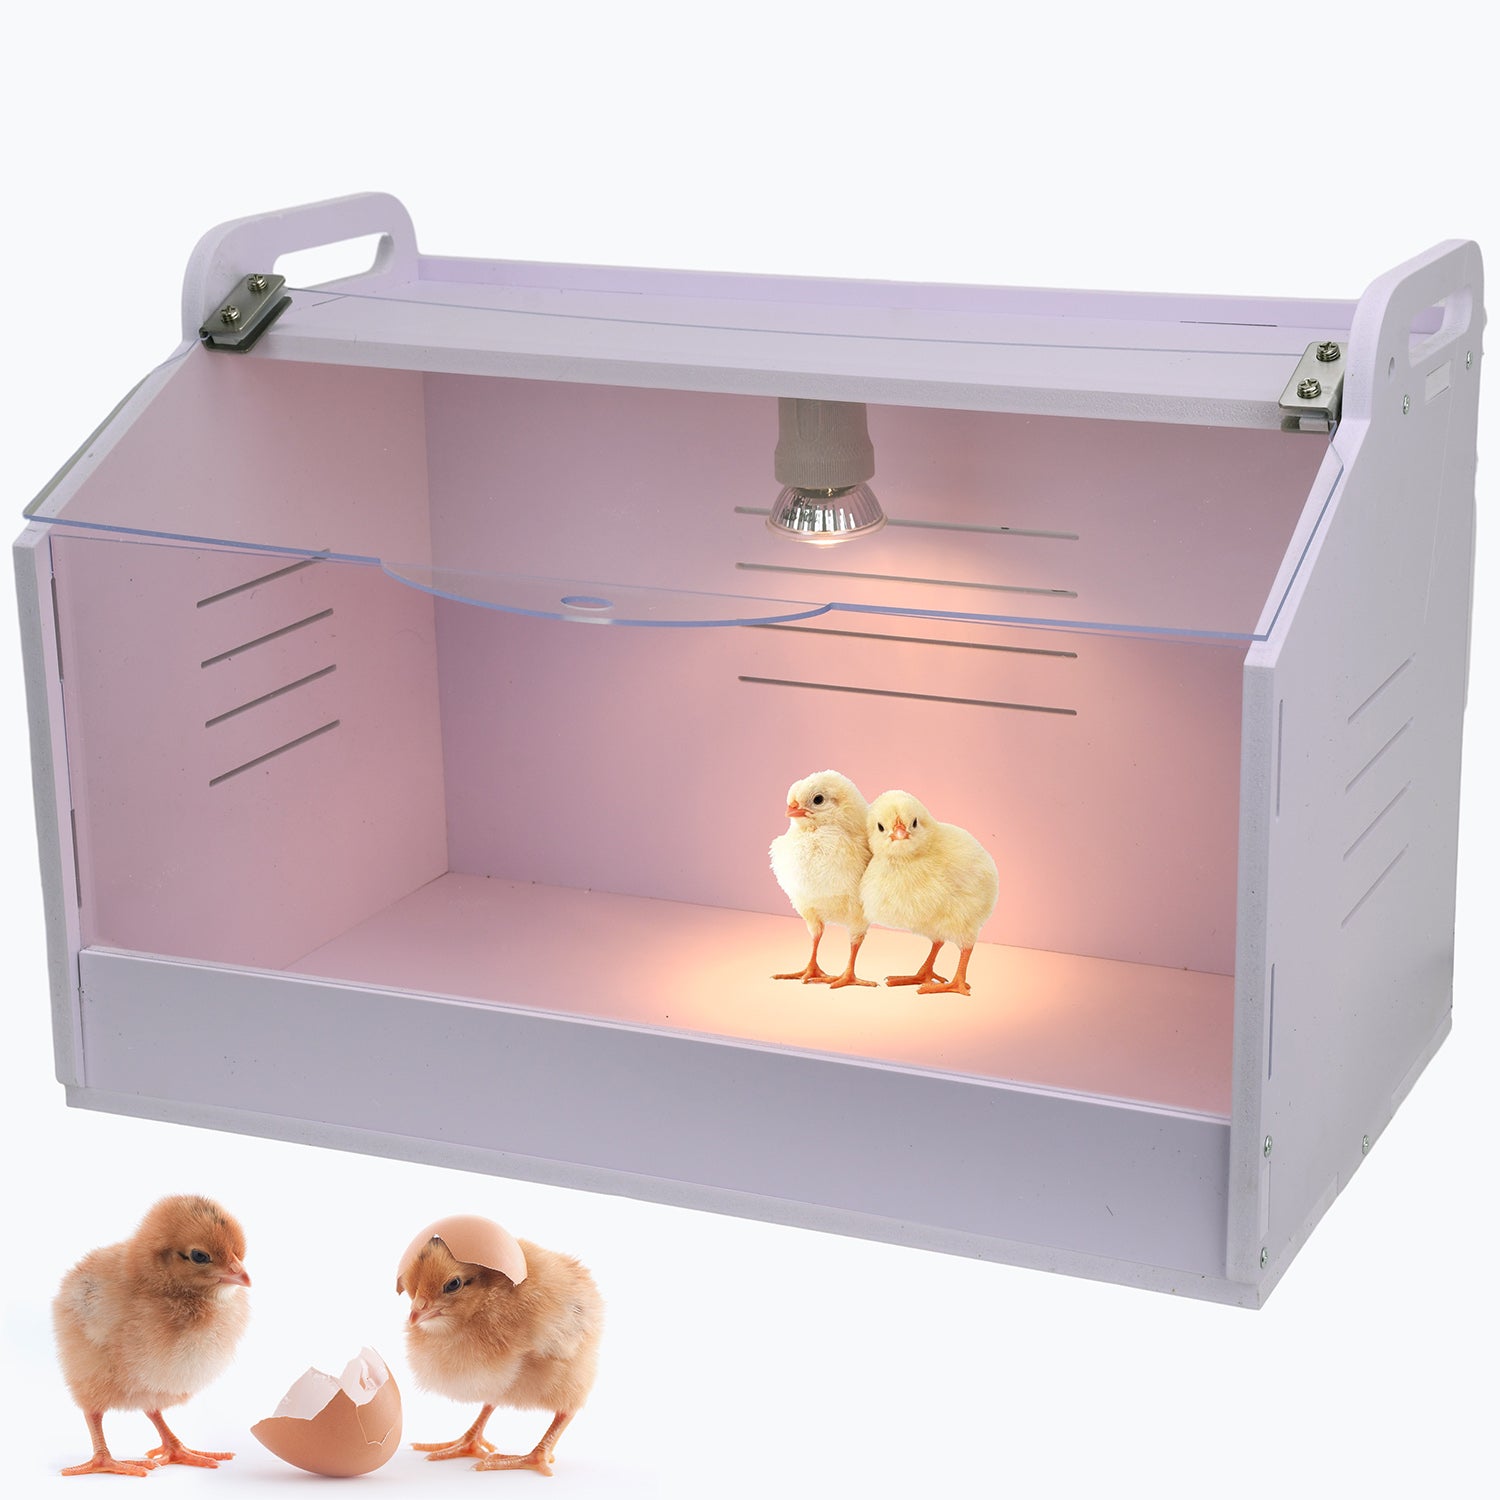 Cyzarize Chick Brooder Box with Heat Lamp Made of High Density PVC Durable. Easy to Clean. Holds Up to 15 Suitable Chicks Quail